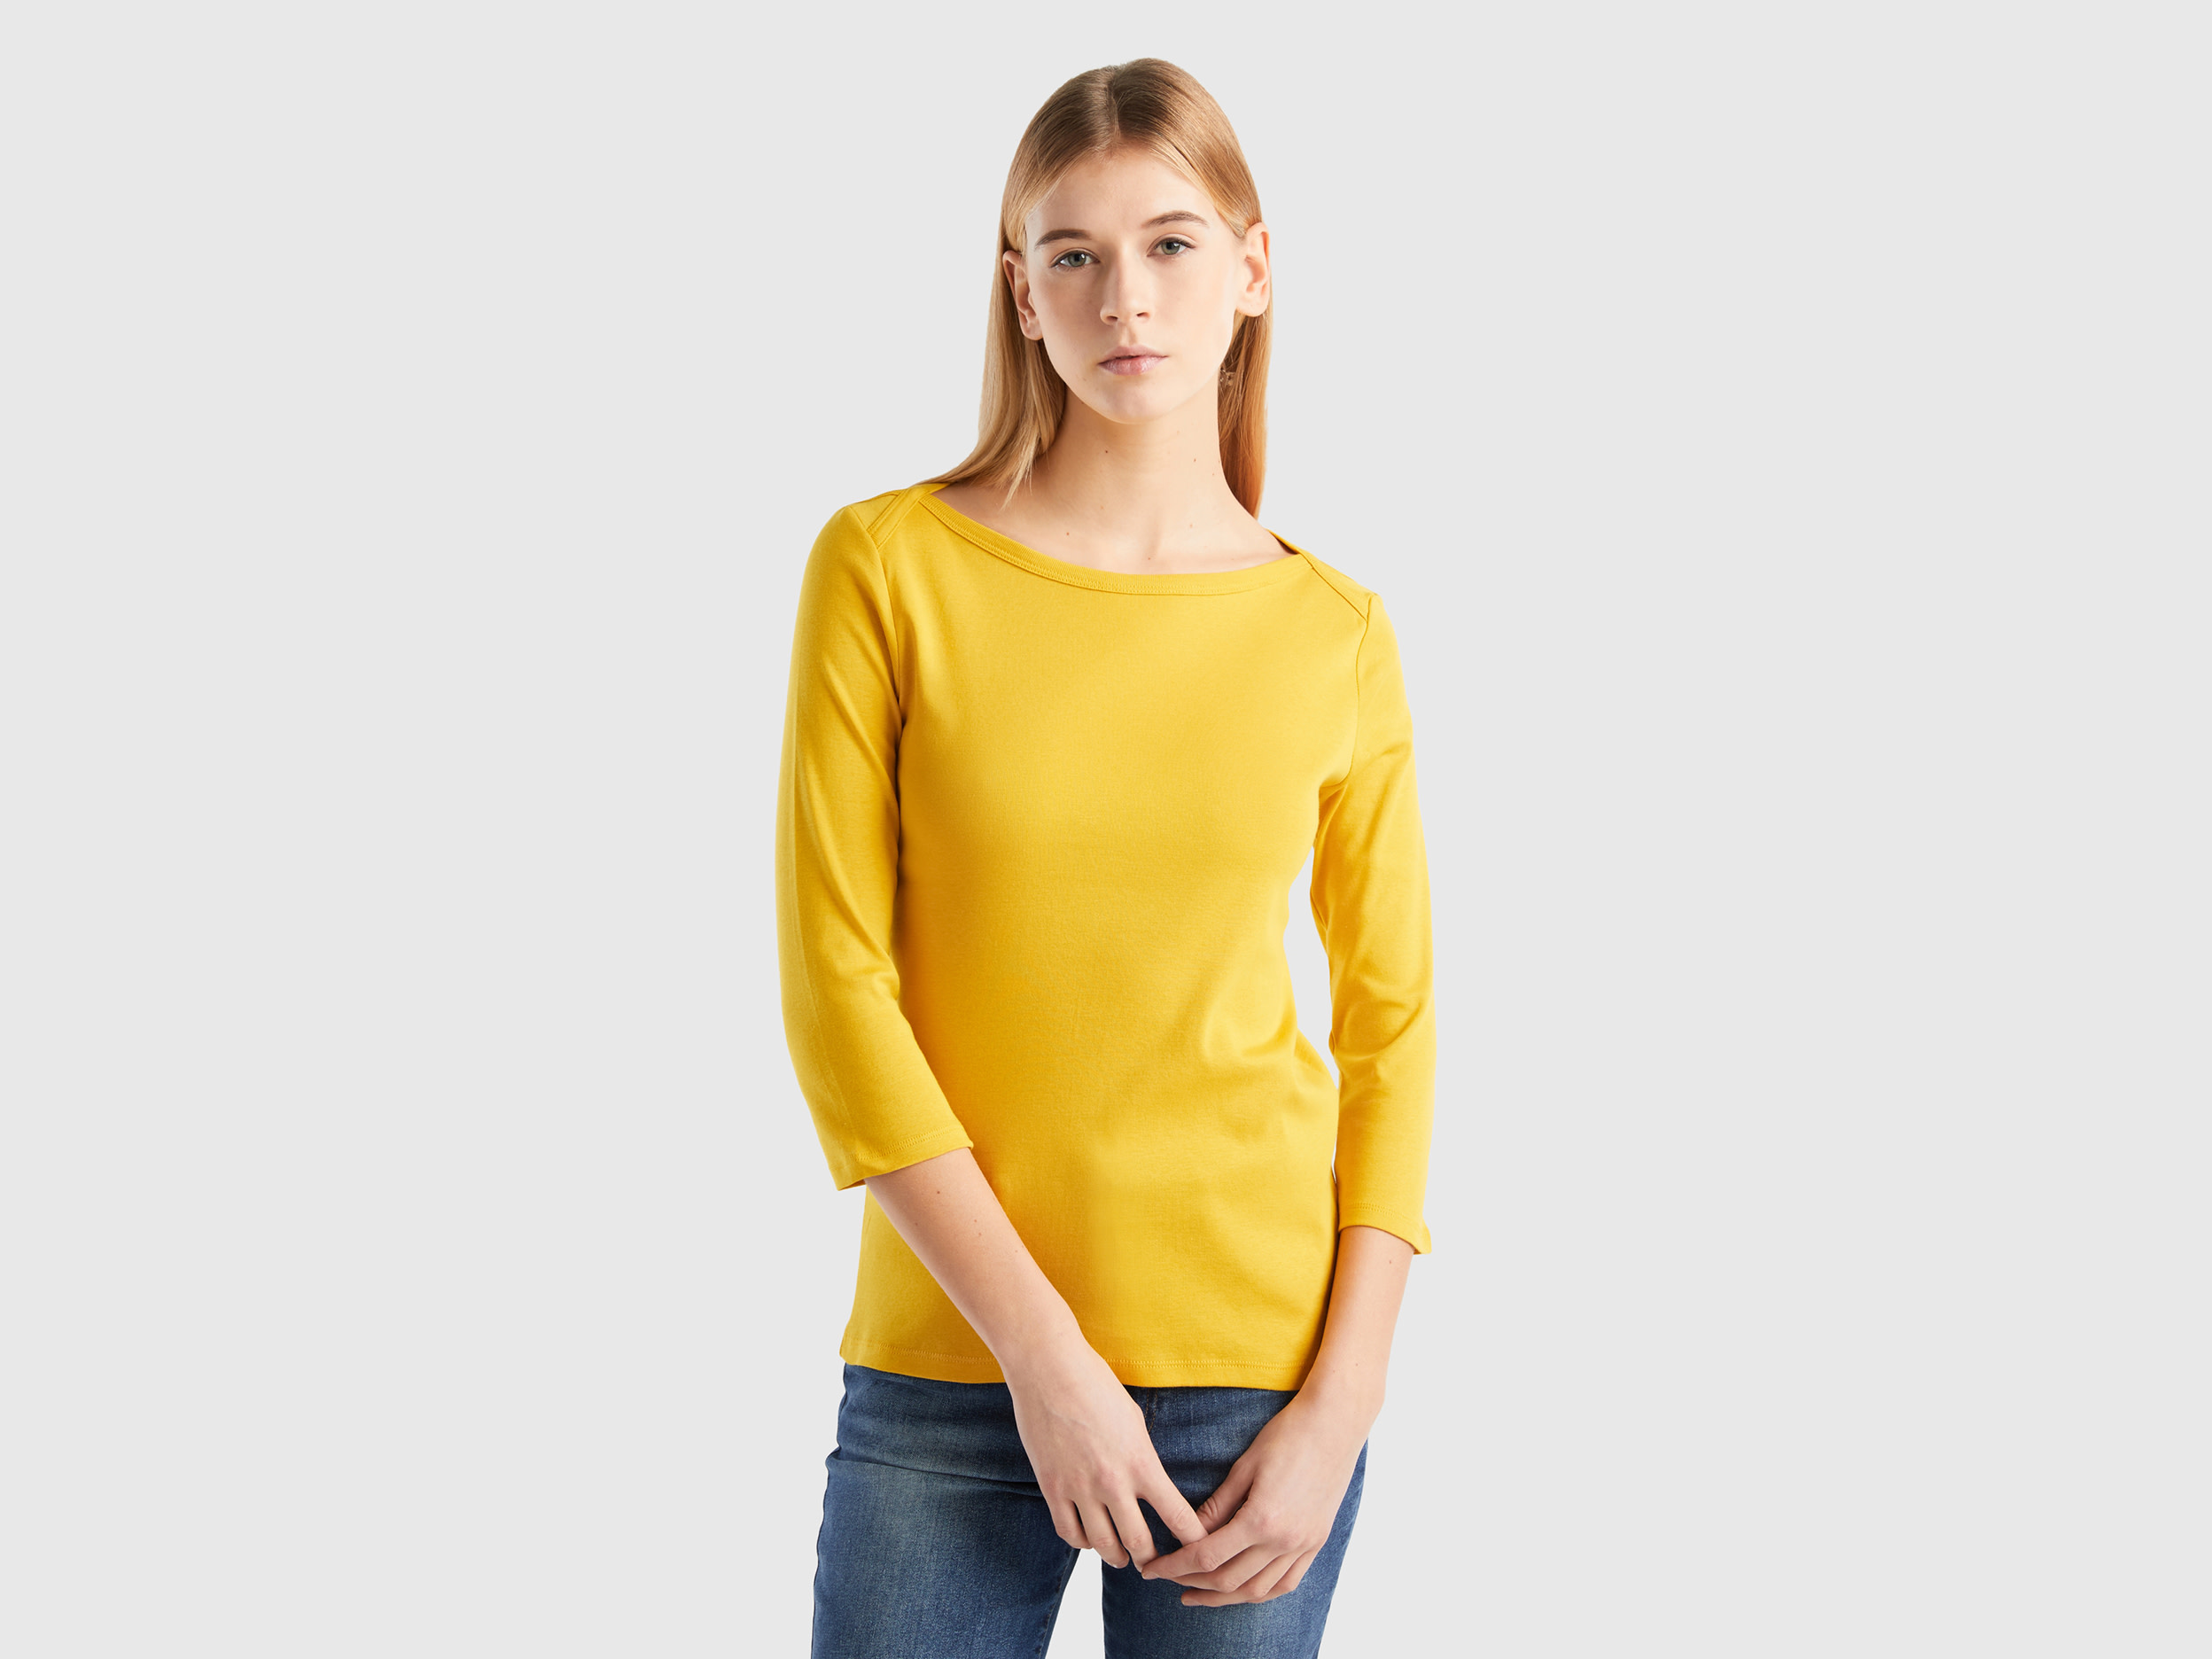 Benetton, T-shirt With Boat Neck In 100% Cotton, size L, Yellow, Women